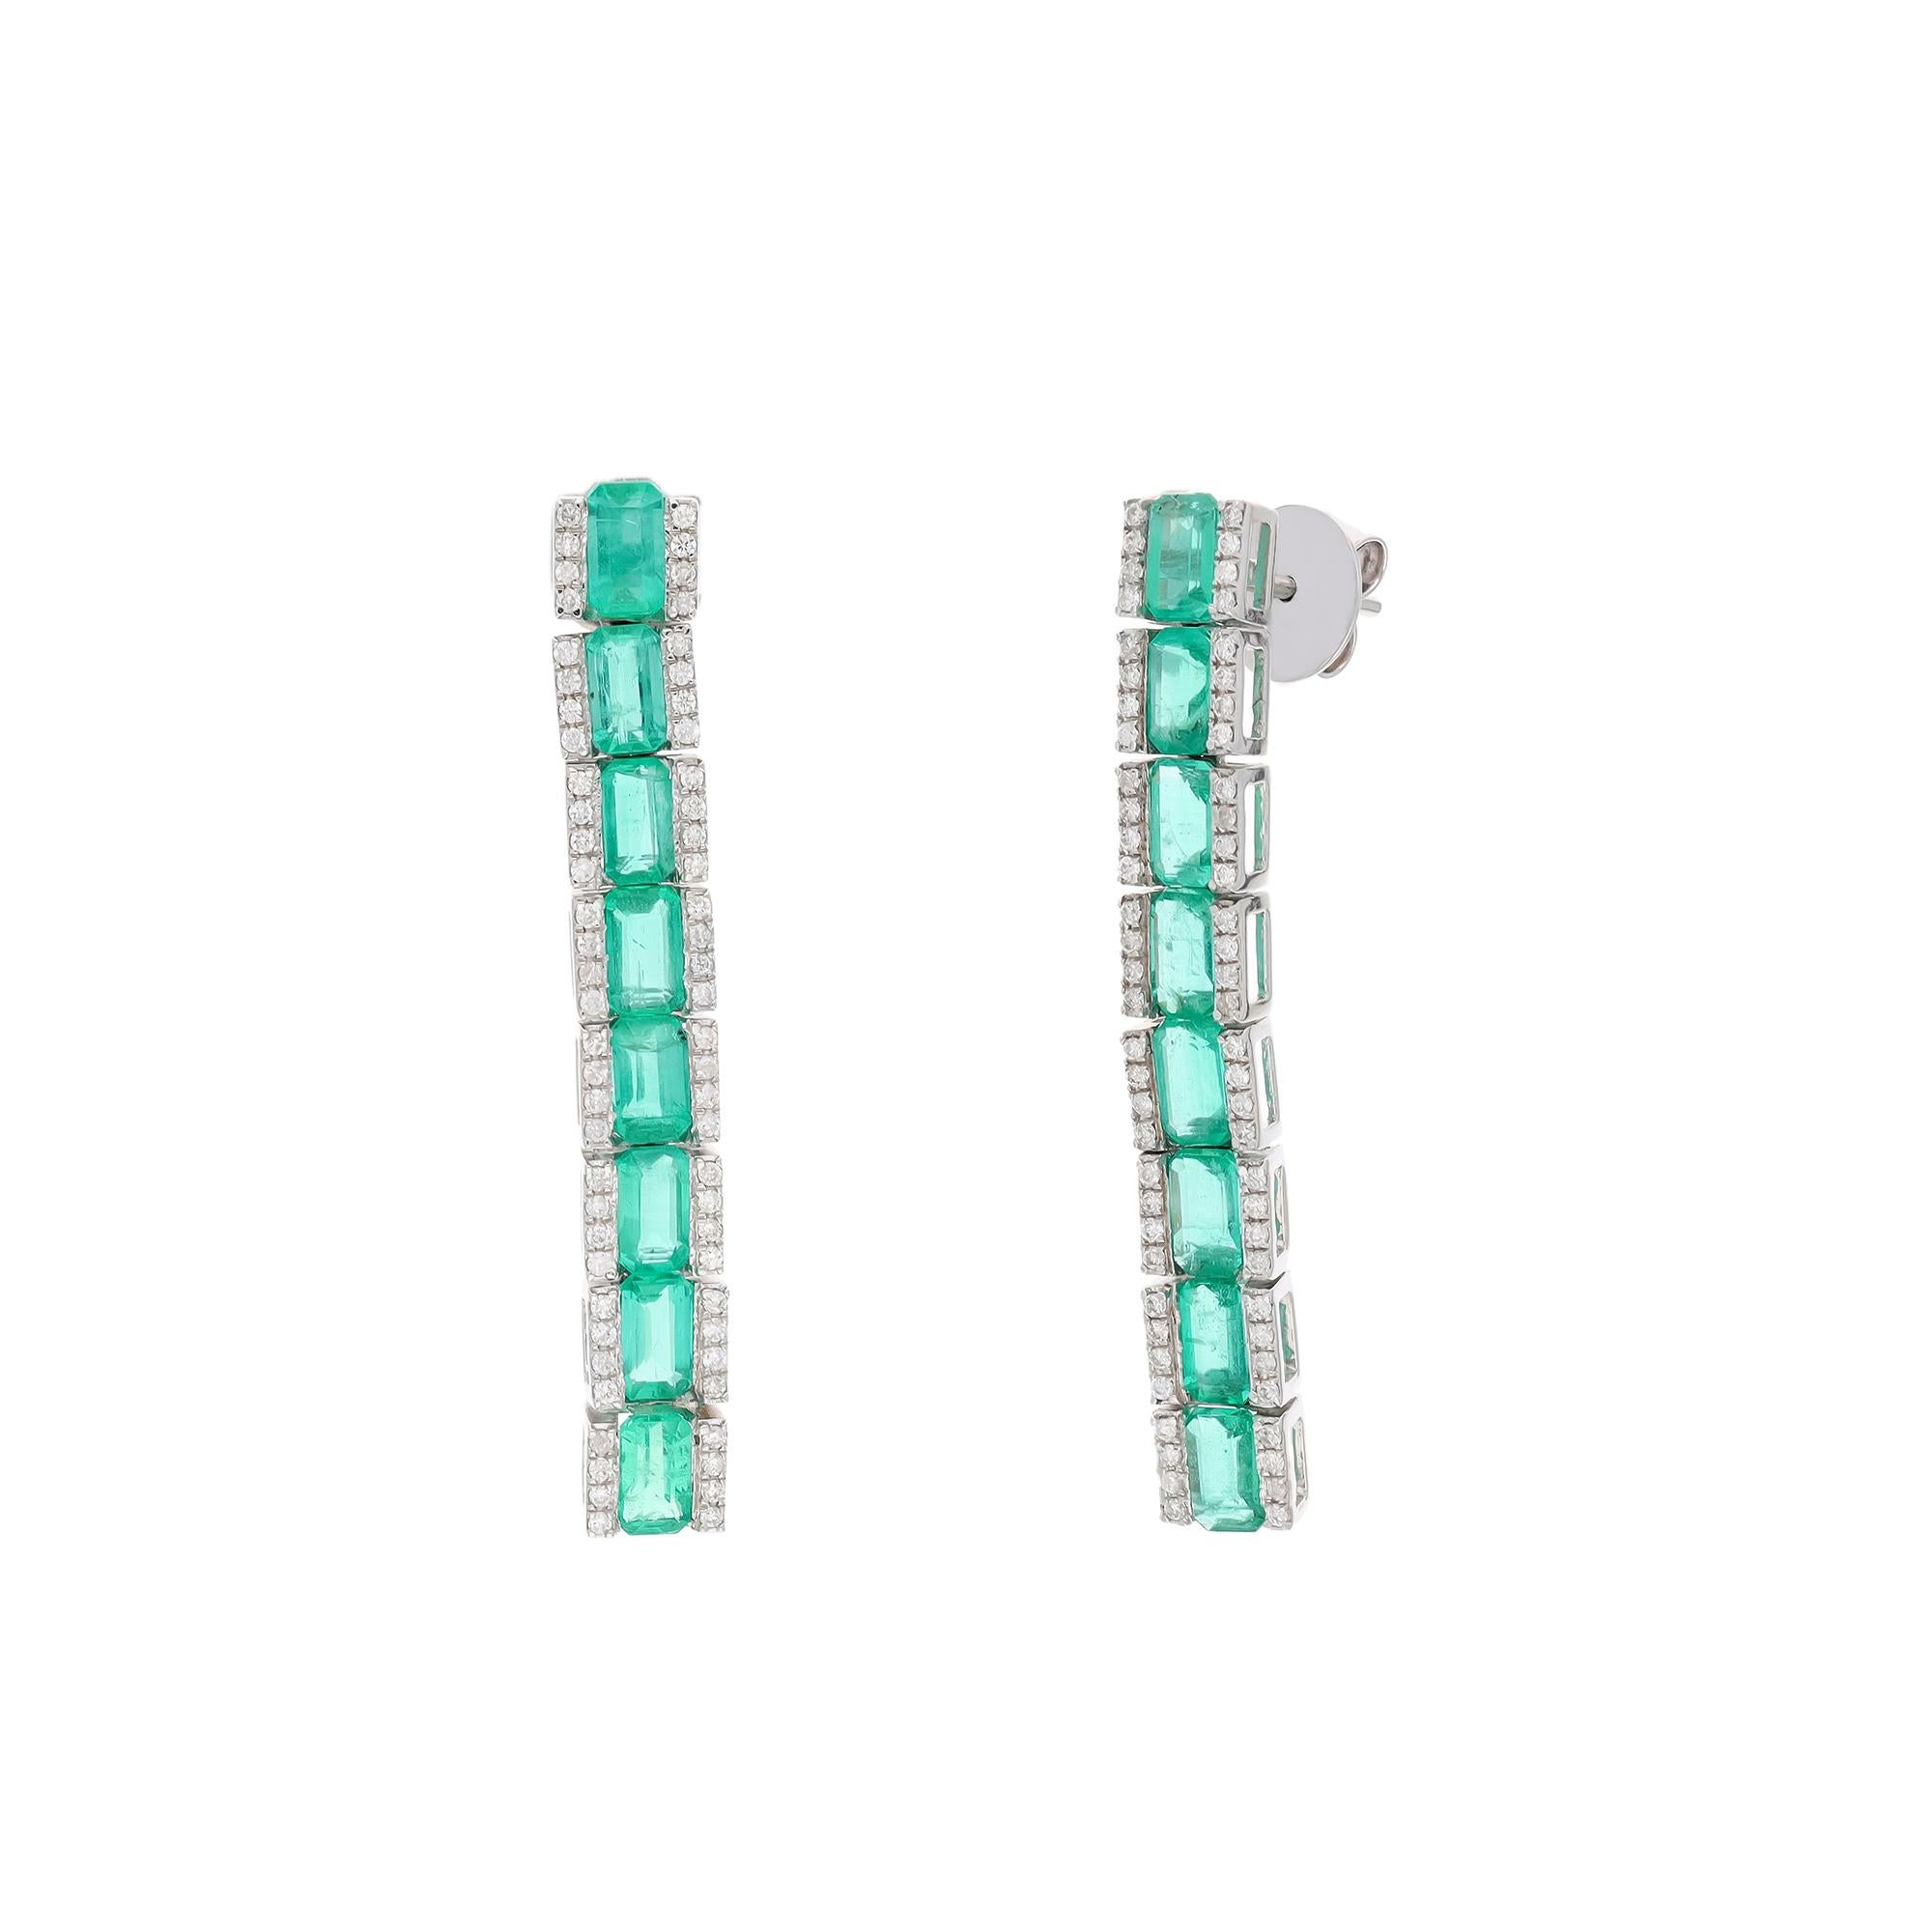 This is a natural Zambian Emerald earring with diamonds and 18k gold. The emeralds are very high quality and very good quality diamonds the clarity is vsi and G colour


Emeralds : 4.63carats
diamonds : 0.50 carats
gold : 5.844 gm

This is a brand